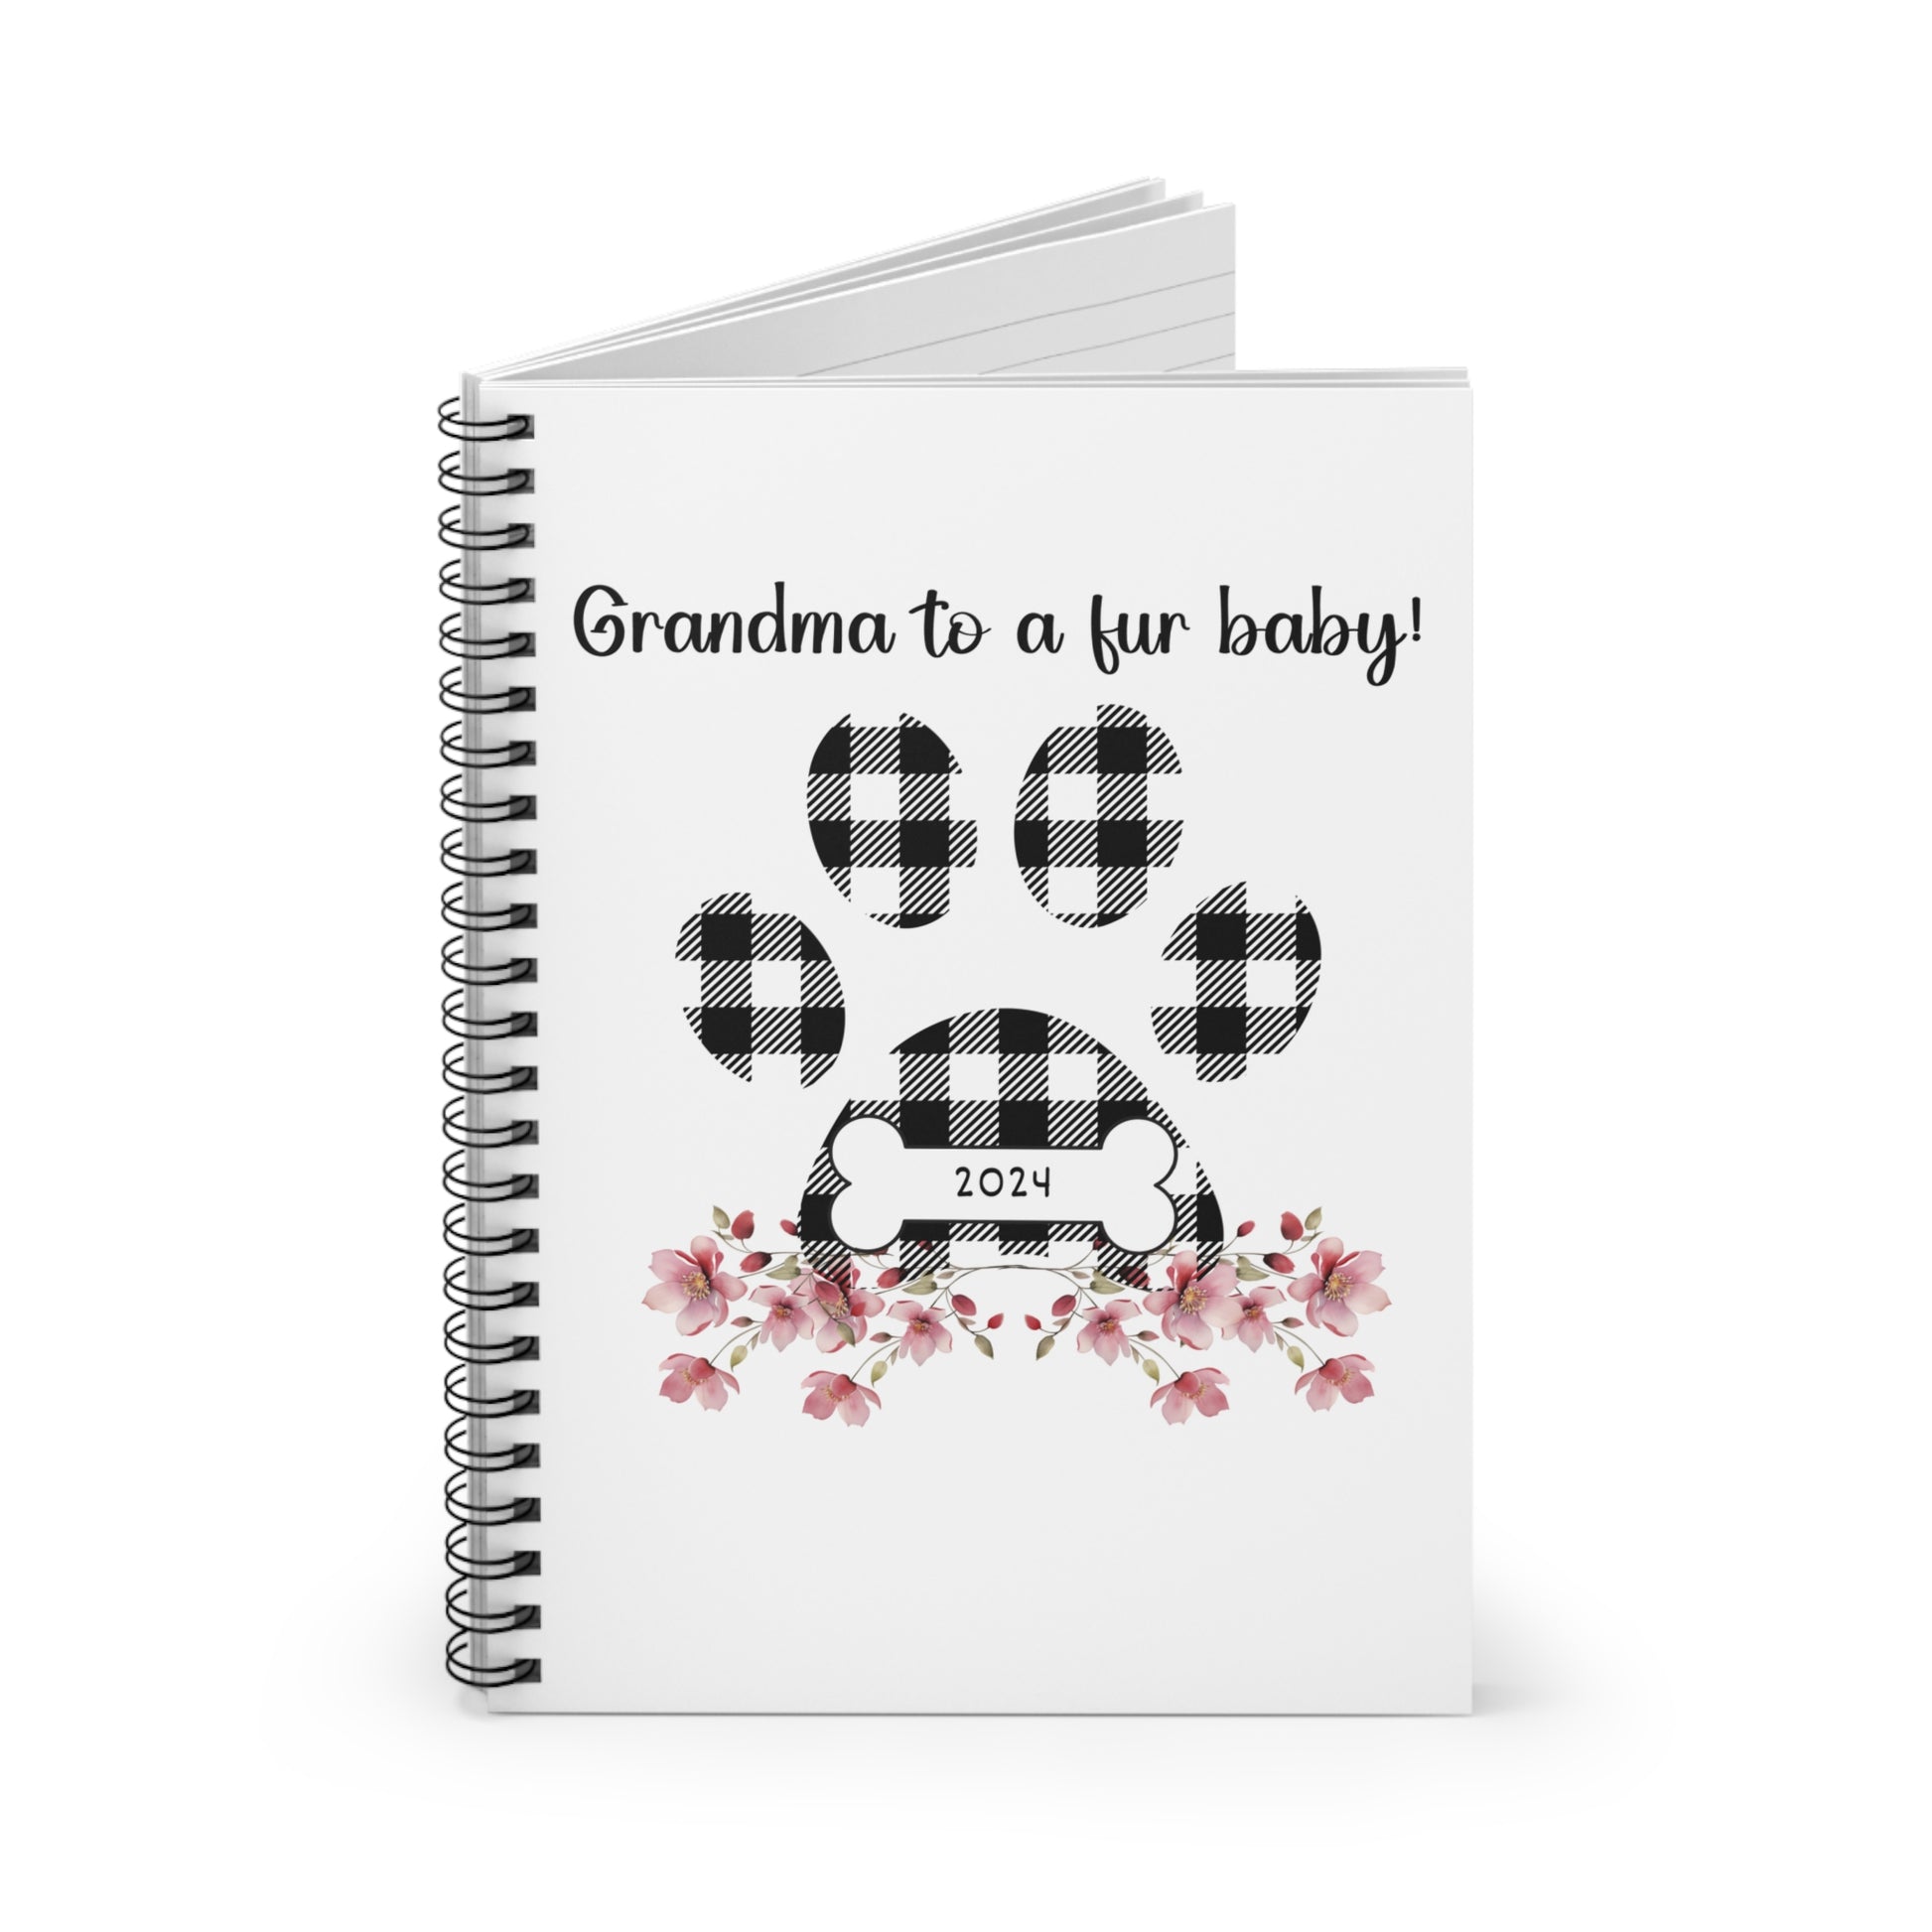 Grandma to a Fur Baby Spiral Notebook, open view.